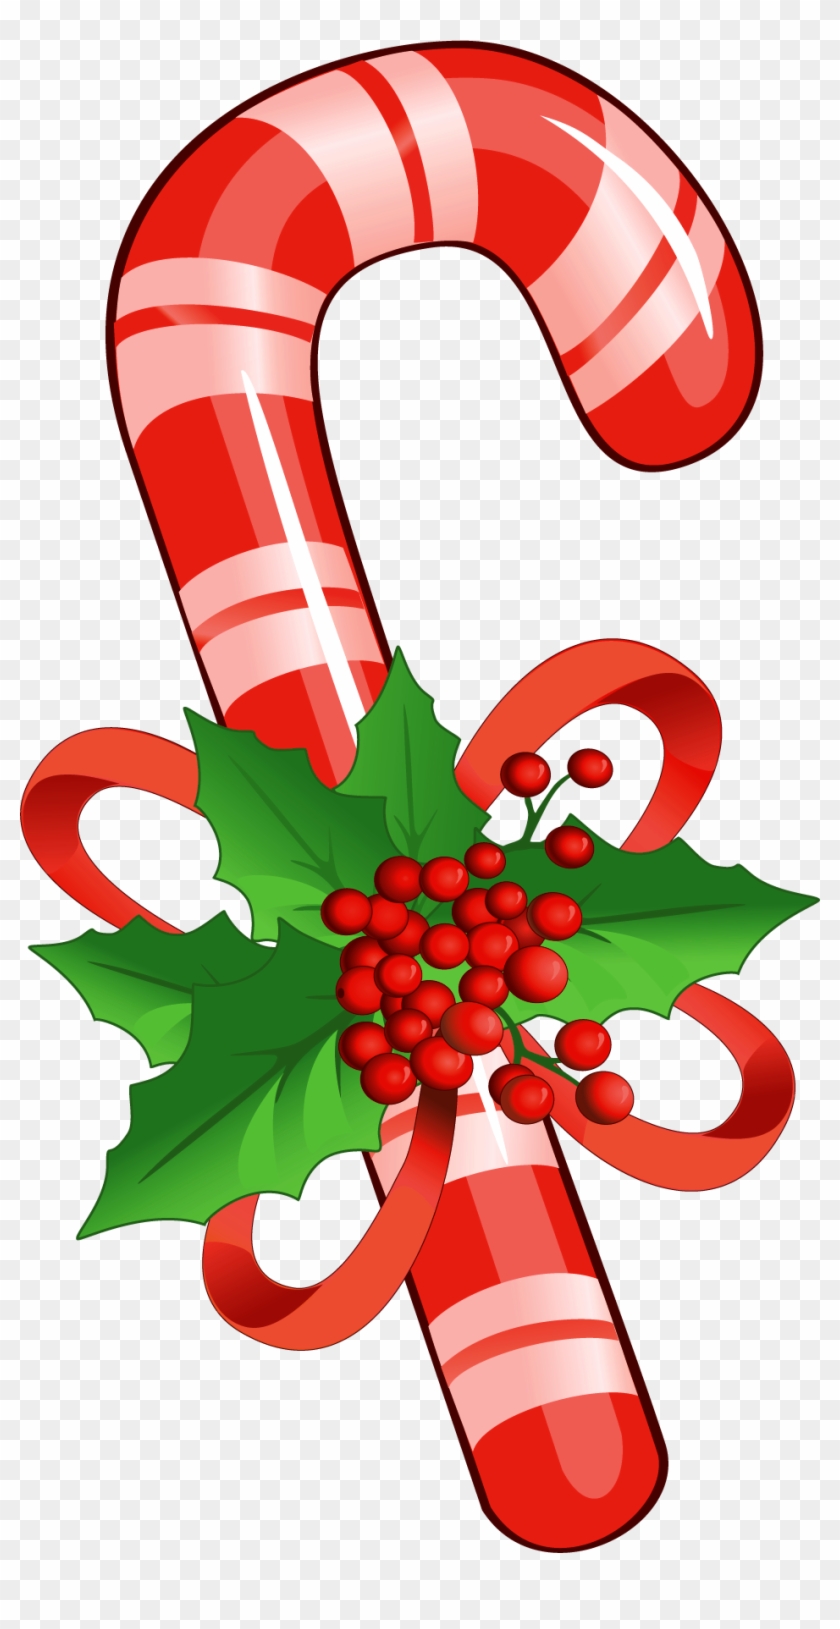 Candy - Candy Cane Clipart Png #170802